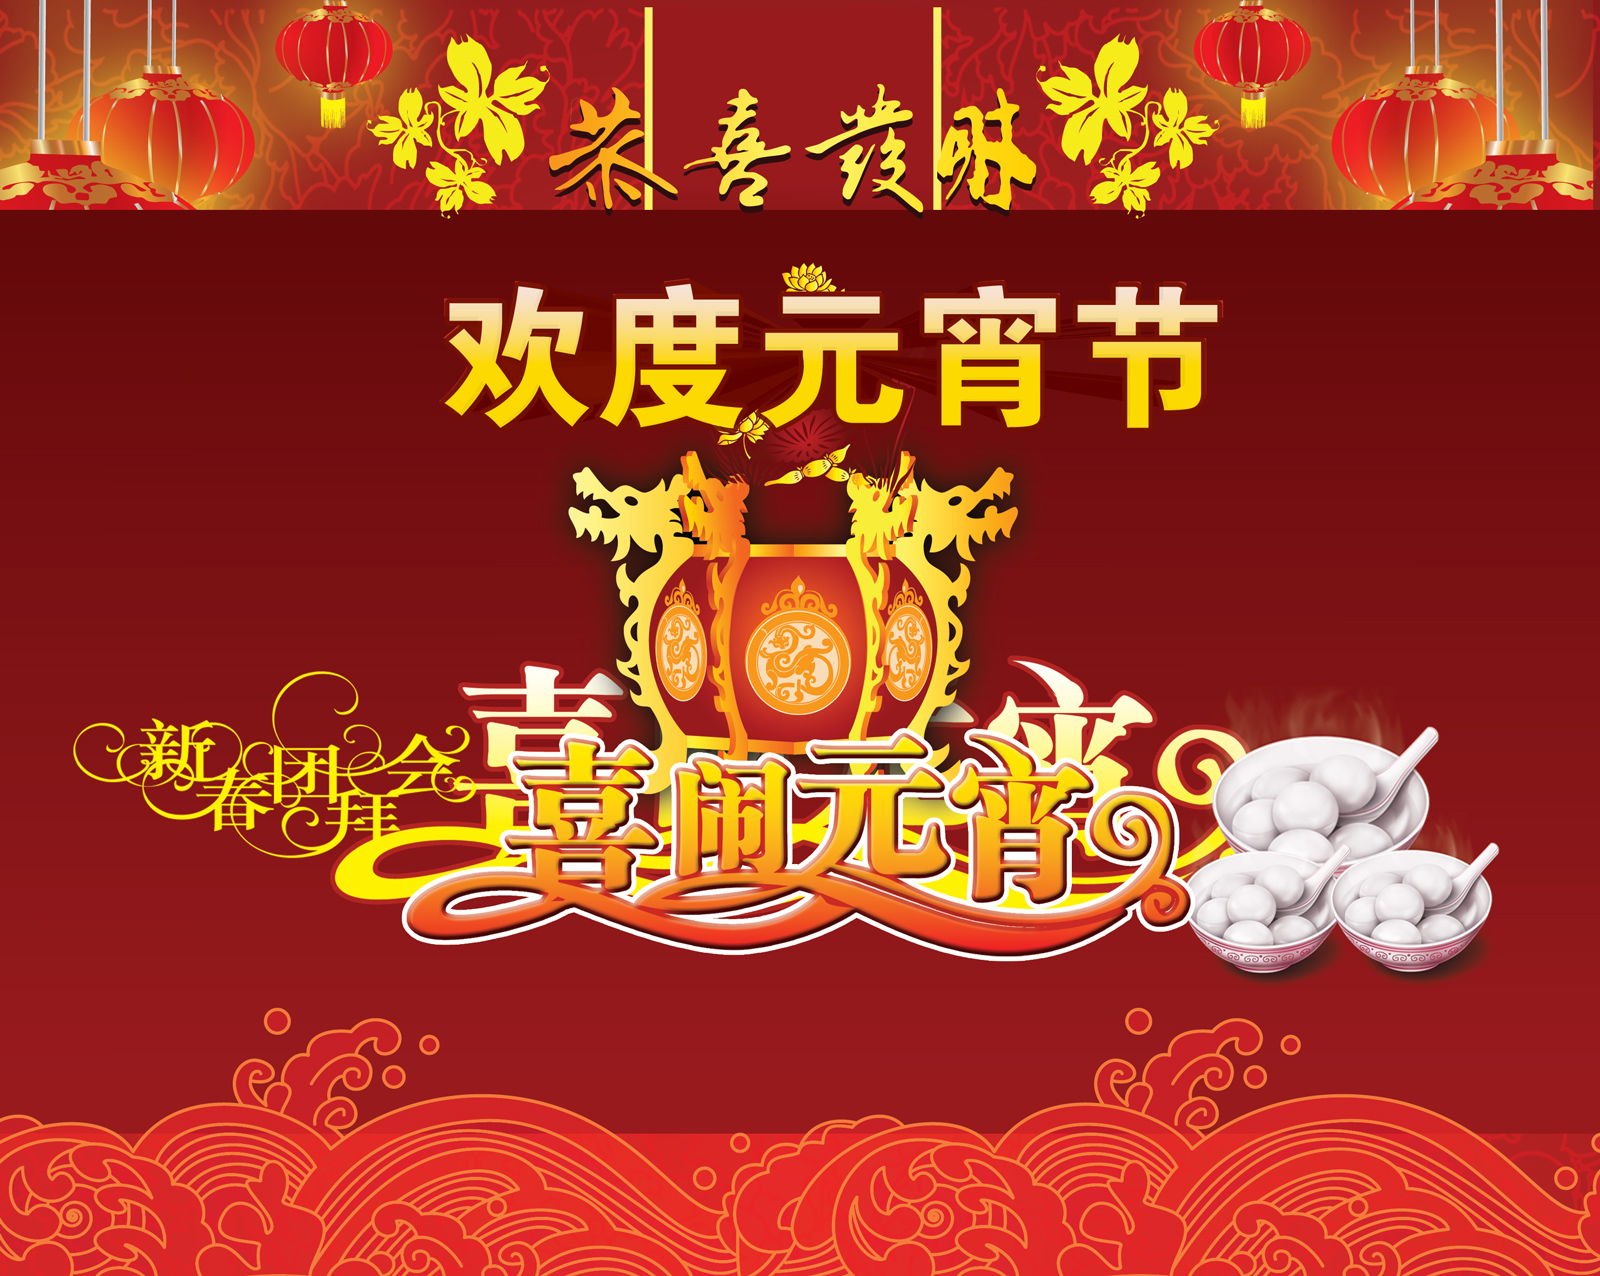 The Lantern Festival posters PSD File Free Download